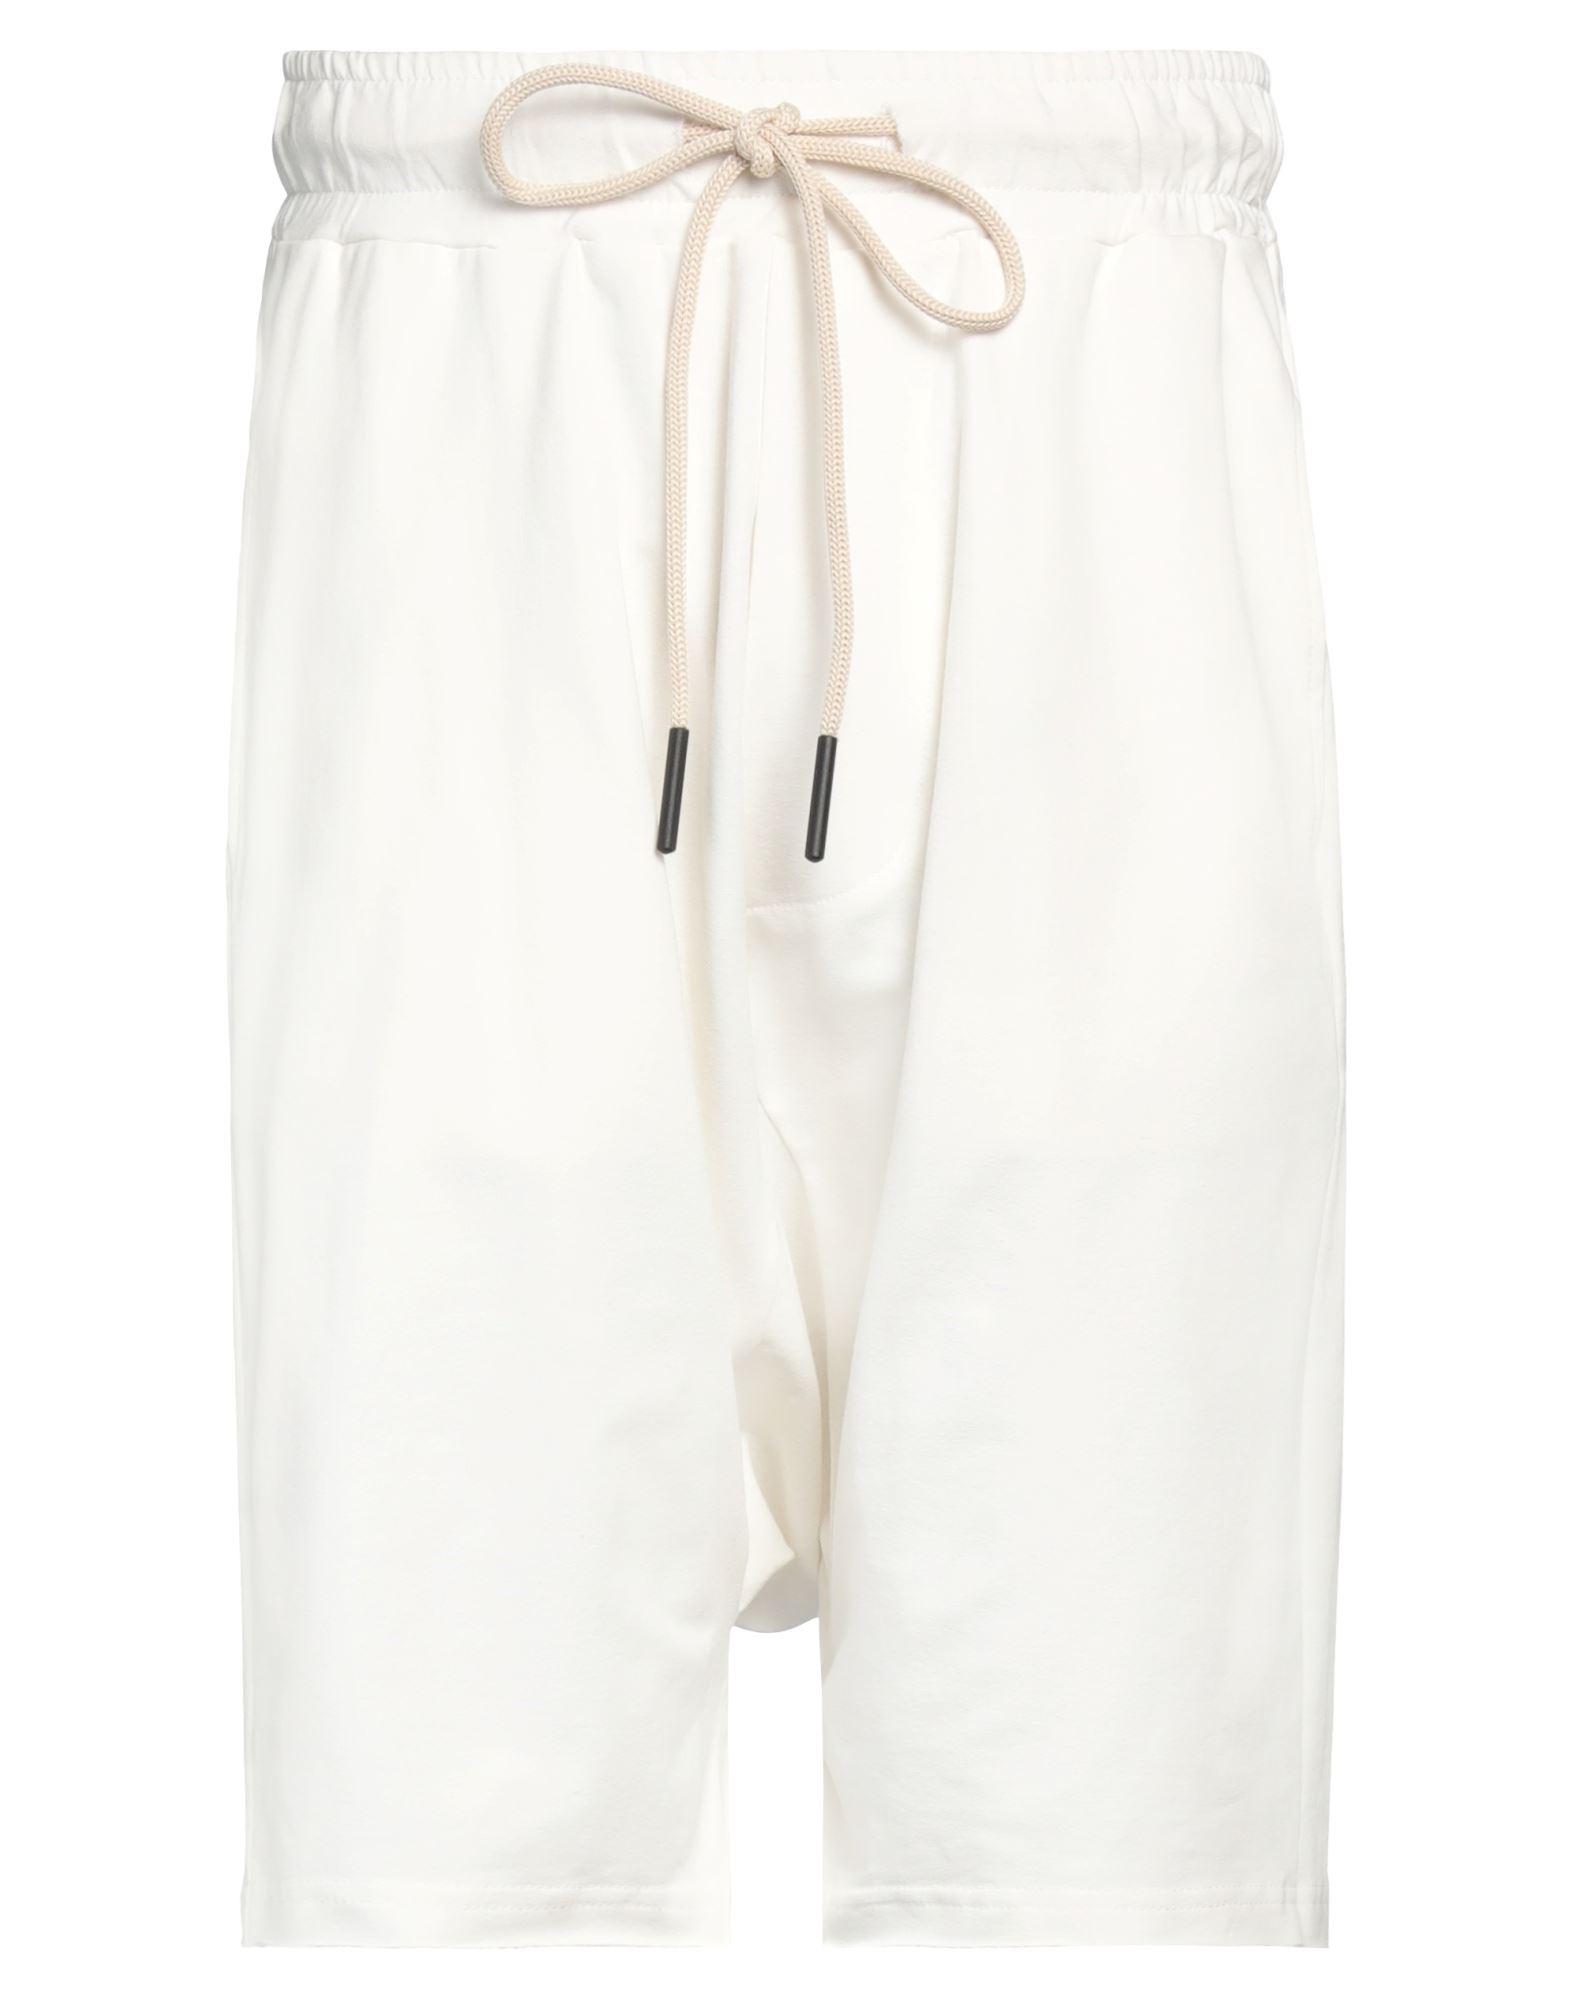 Why Not Brand Man Shorts & Bermuda Shorts Ivory Size M Cotton In White